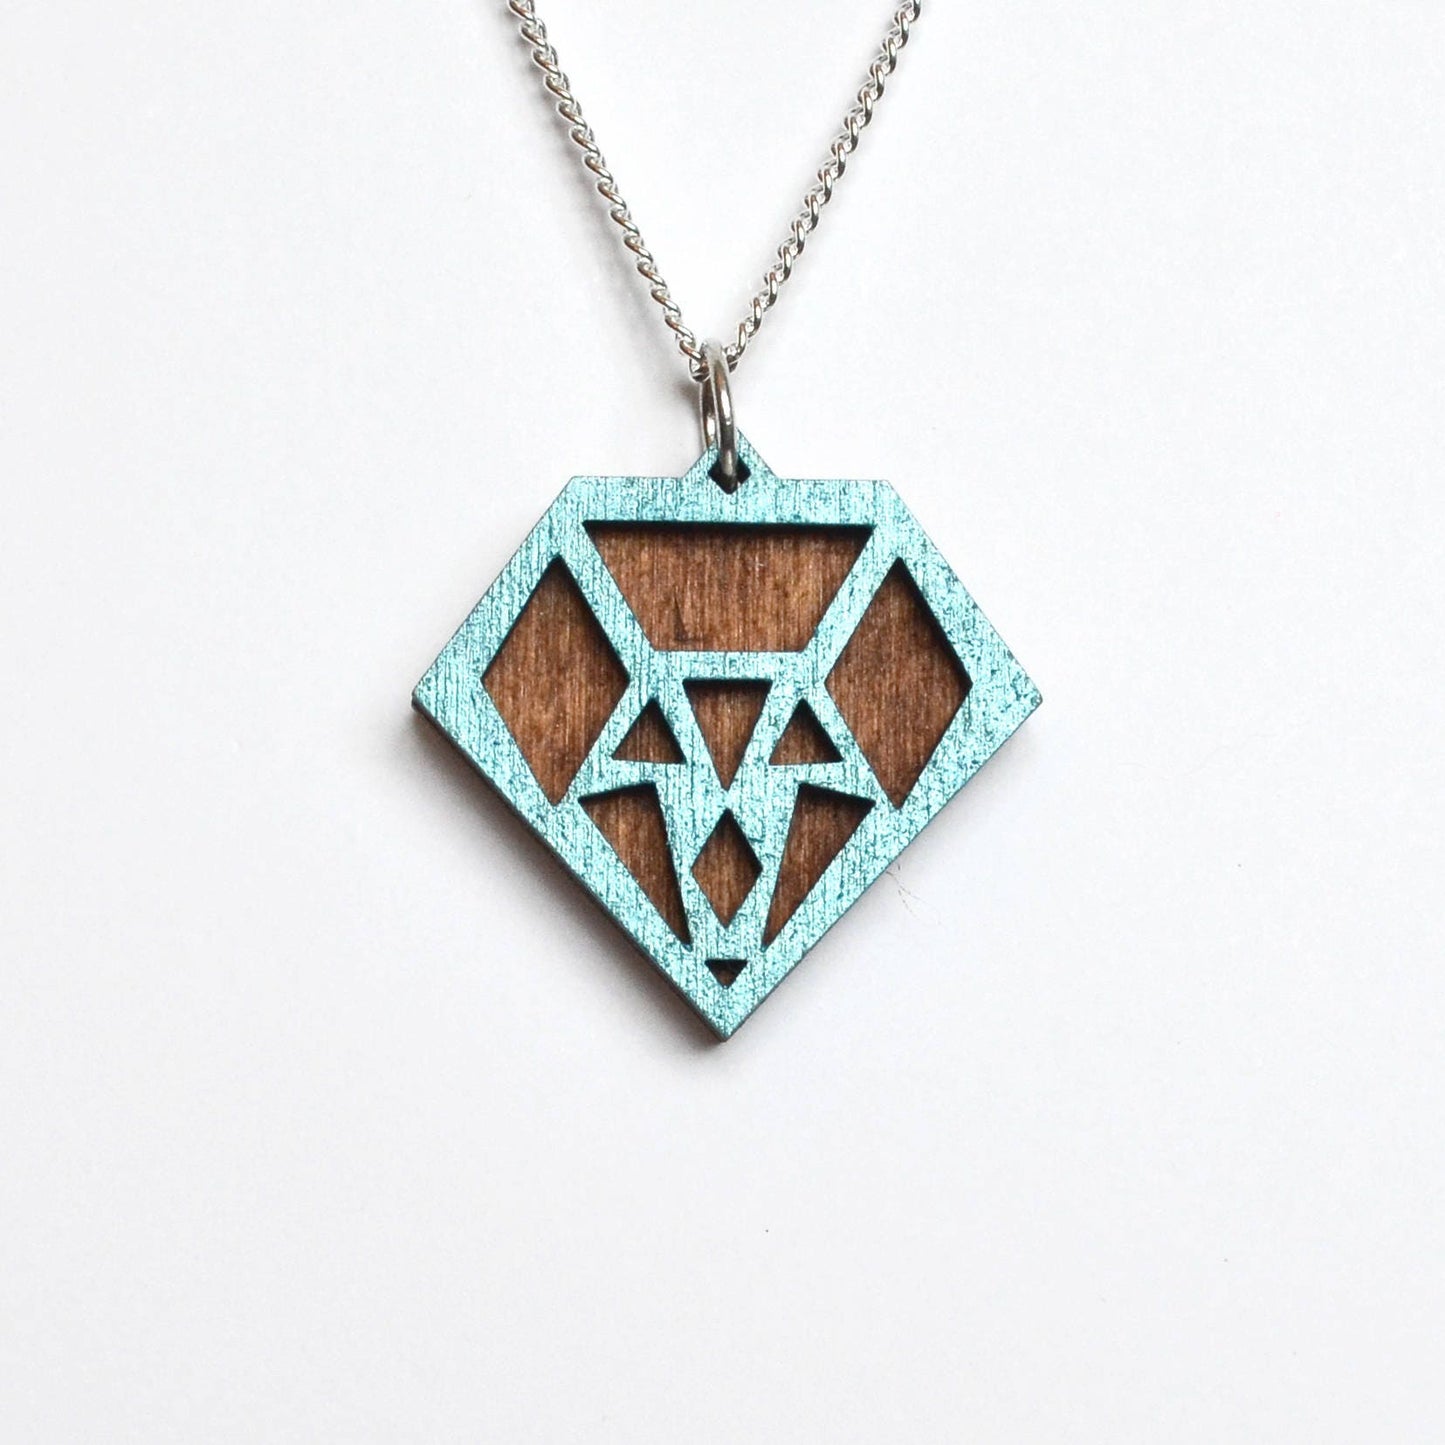 Hand Painted Wooden Diamond Art Deco Geometric Laser Cut Necklace - Small Style Design 2